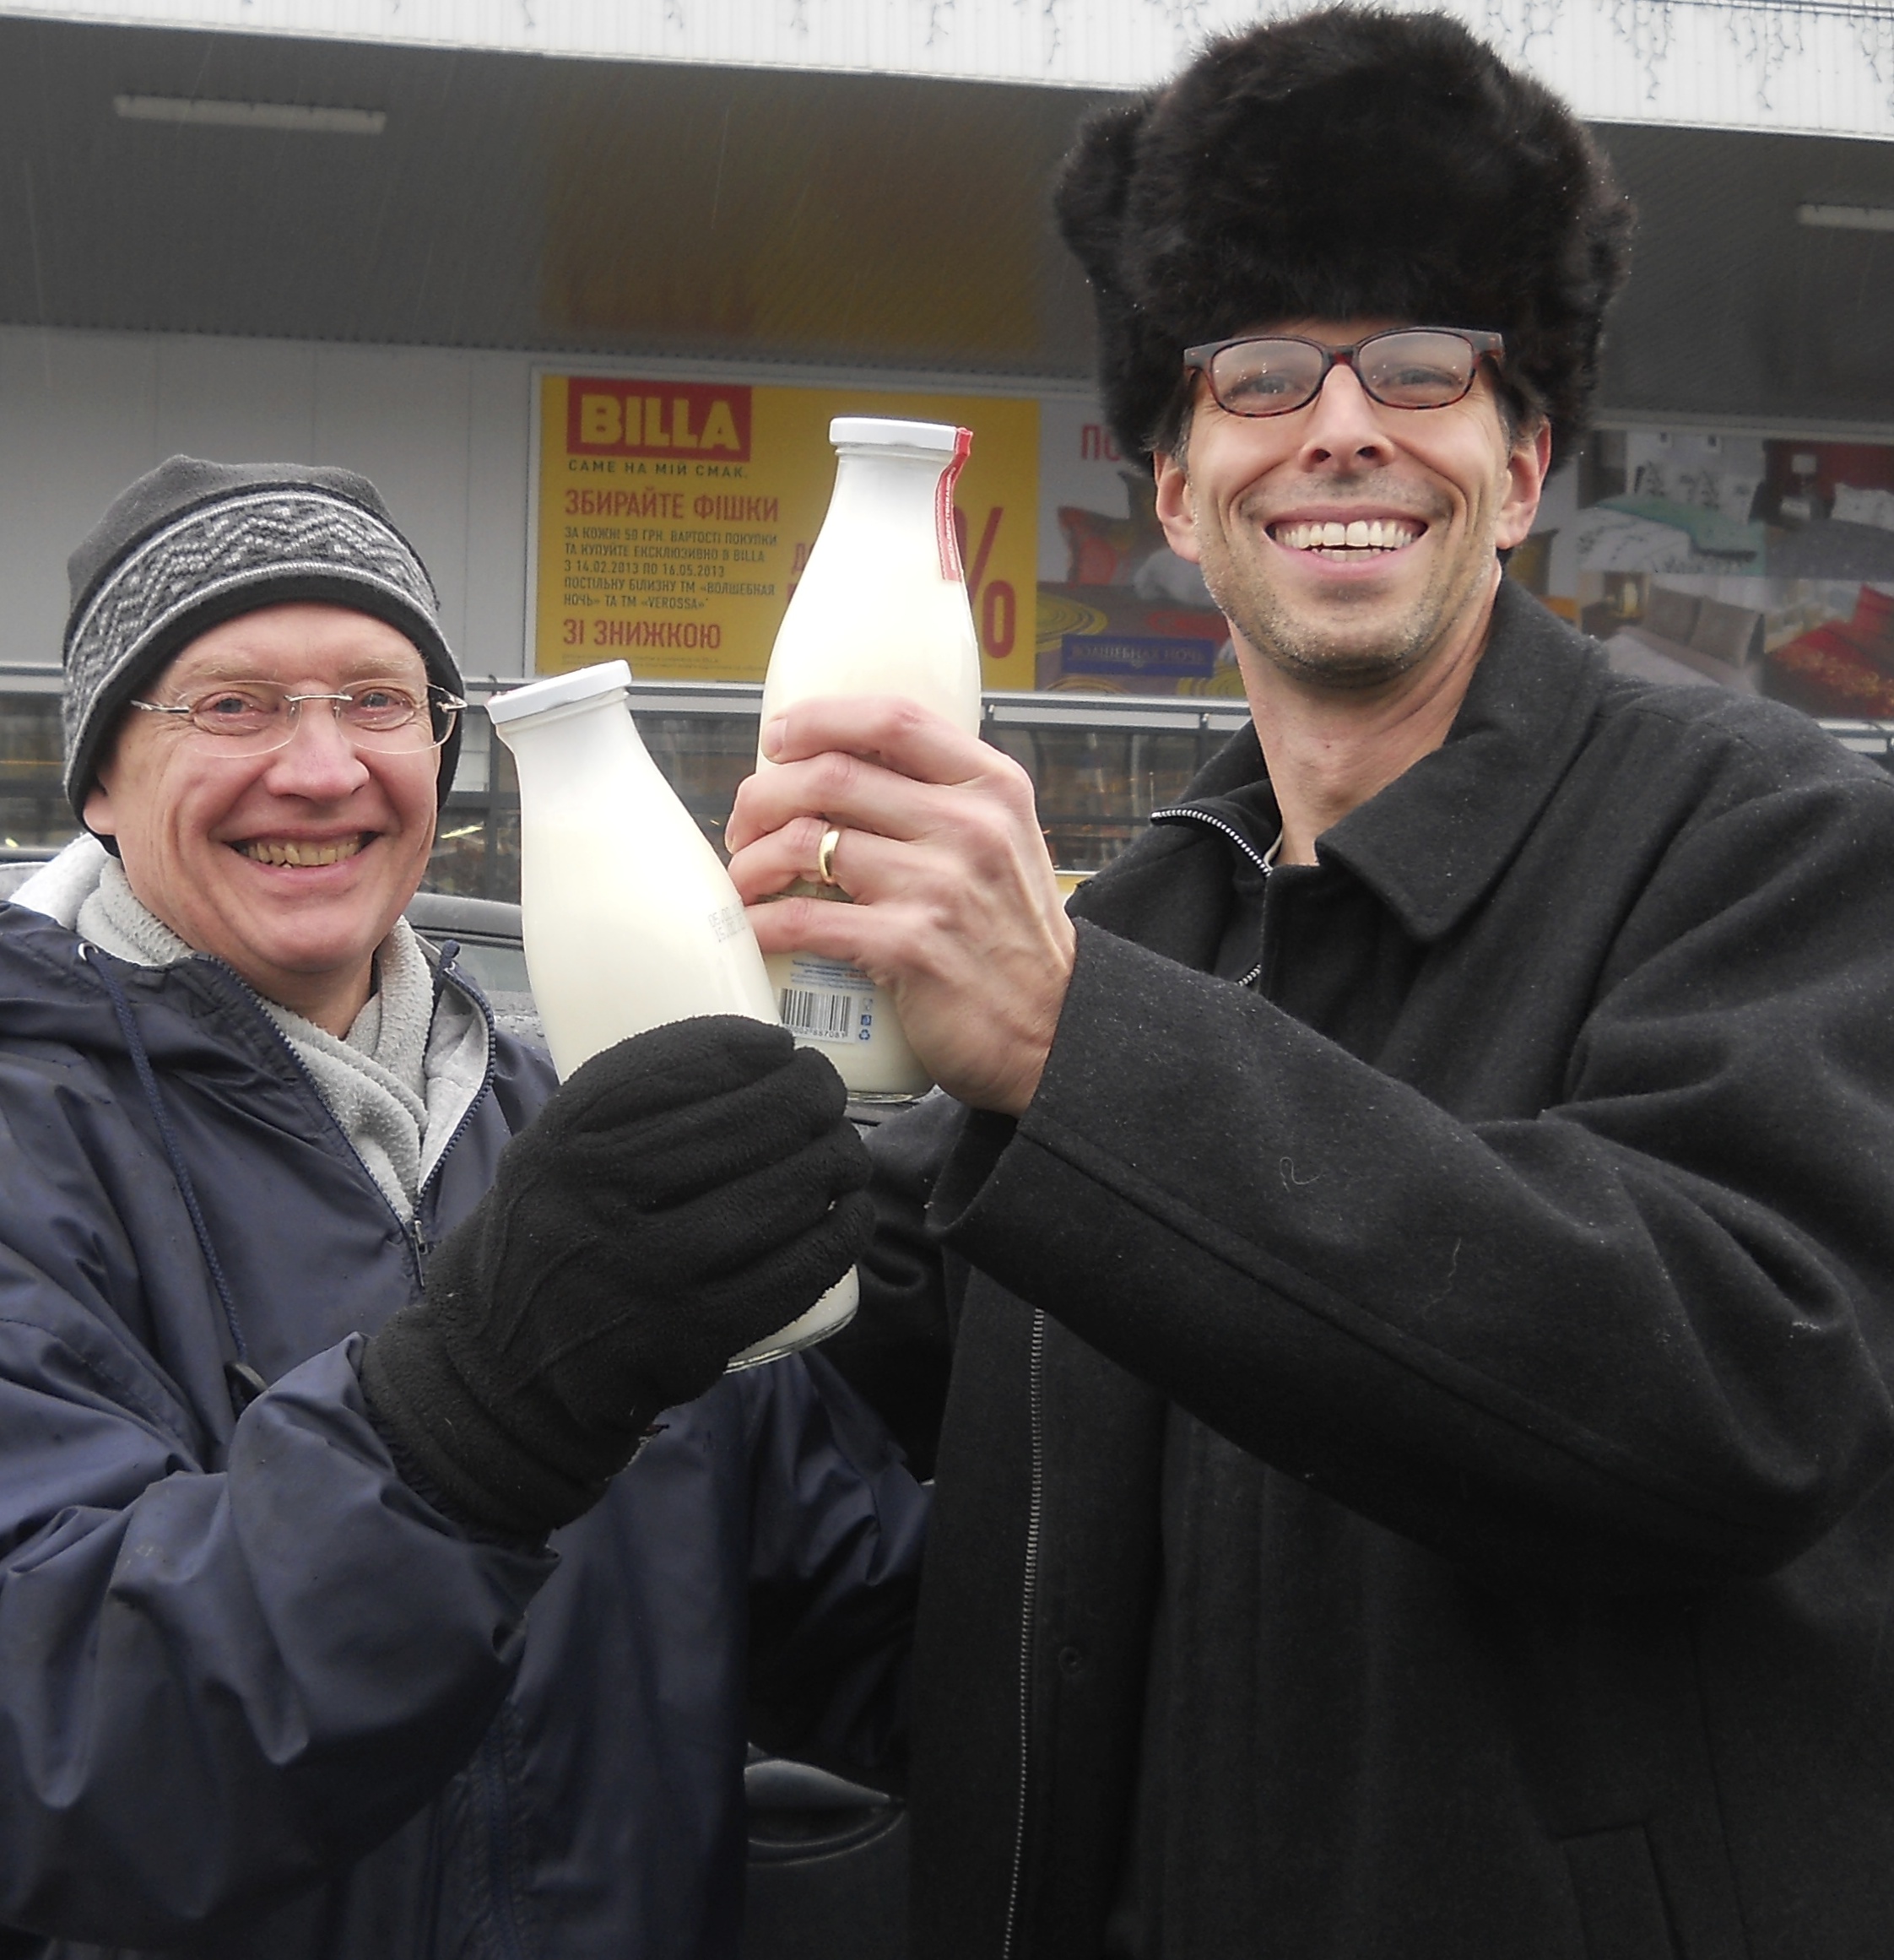 doug-provided-milk-for-the-ride-for-each-vehicle-only-makes-sense-cheers.jpg